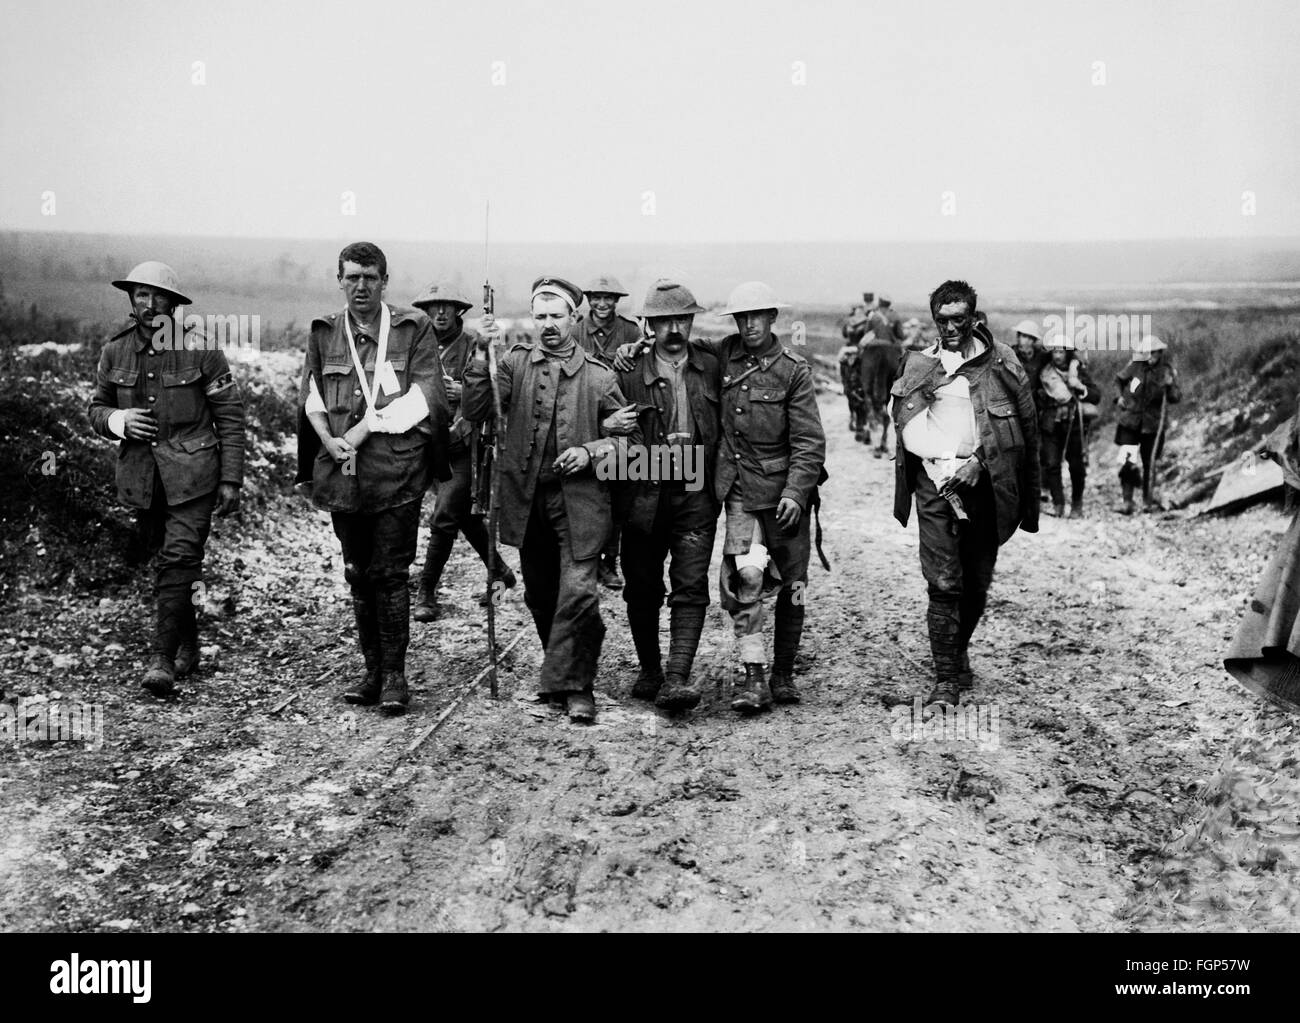 Battle of Verdun 1916 - British Wounded soldiers Stock Photo